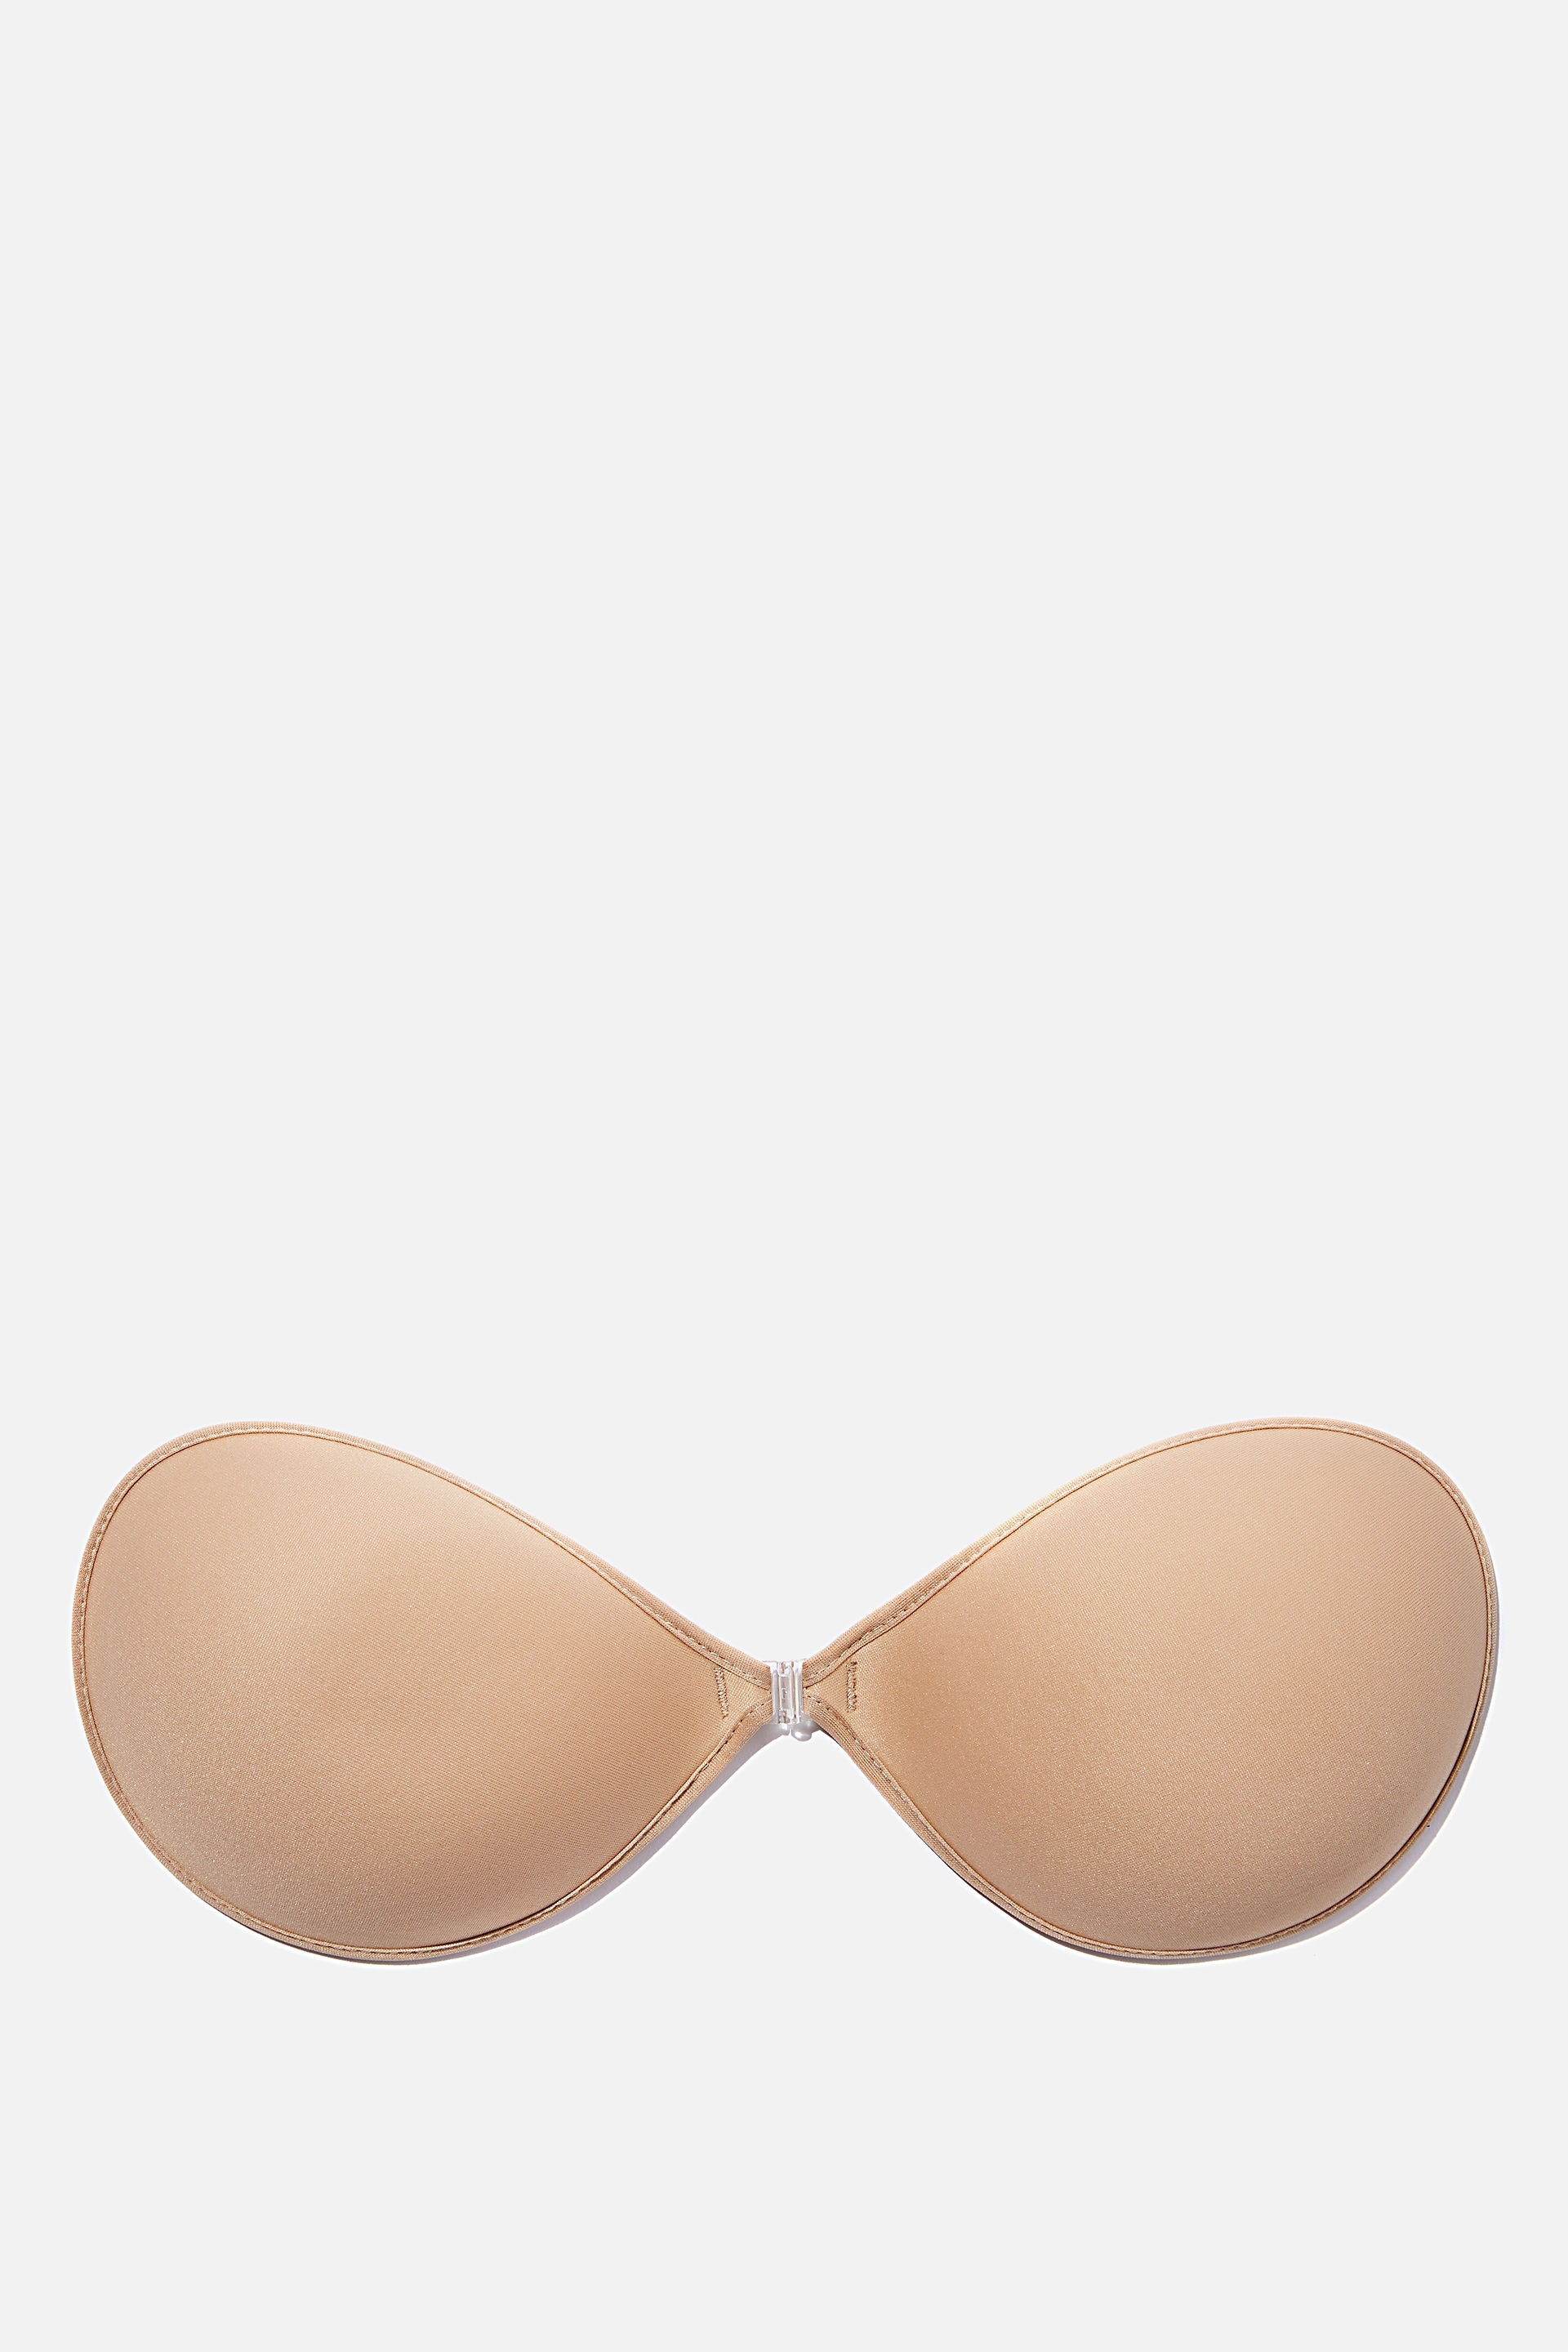 Stick Em Up Bra by Cotton On Body Online, THE ICONIC